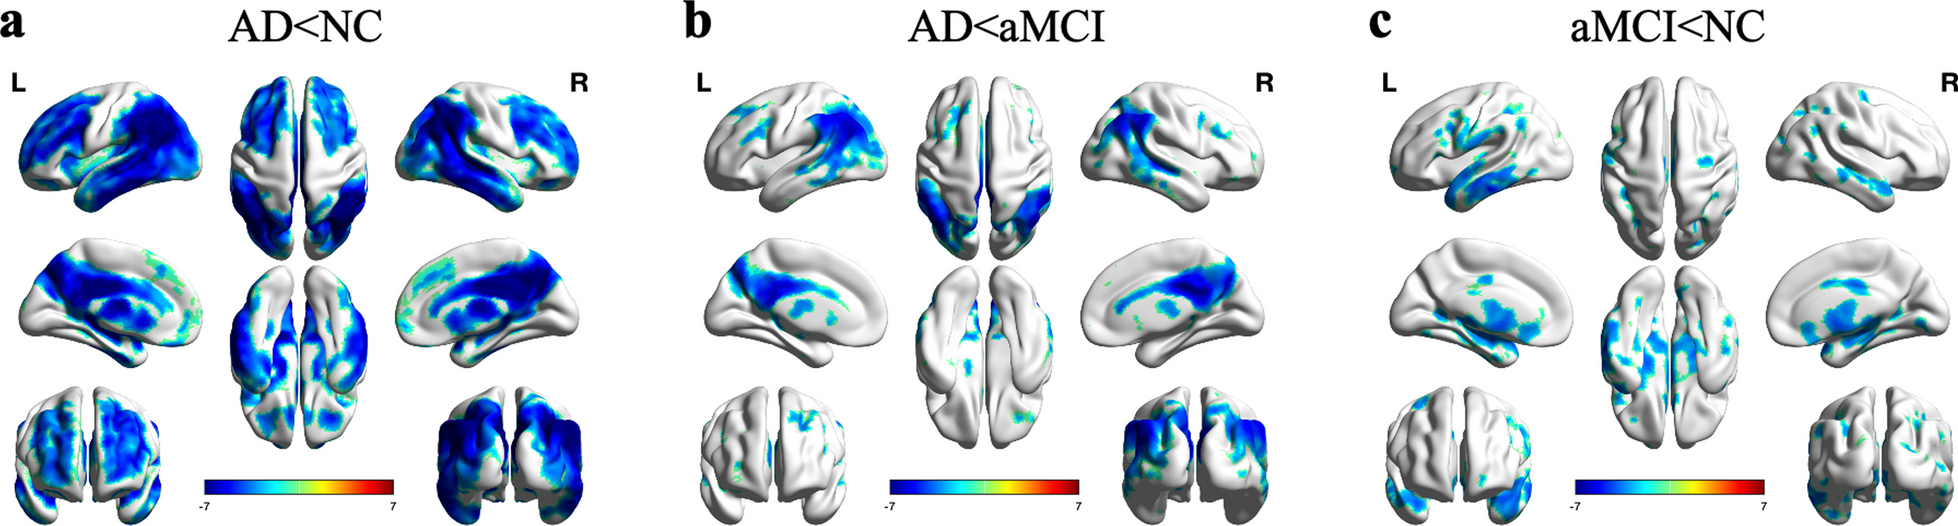 Comparison of 18F-FDG PET and arterial spin labeling MRI in evaluating Alzheimer’s disease and amnestic mild cognitive impairment using integrated PET/MR